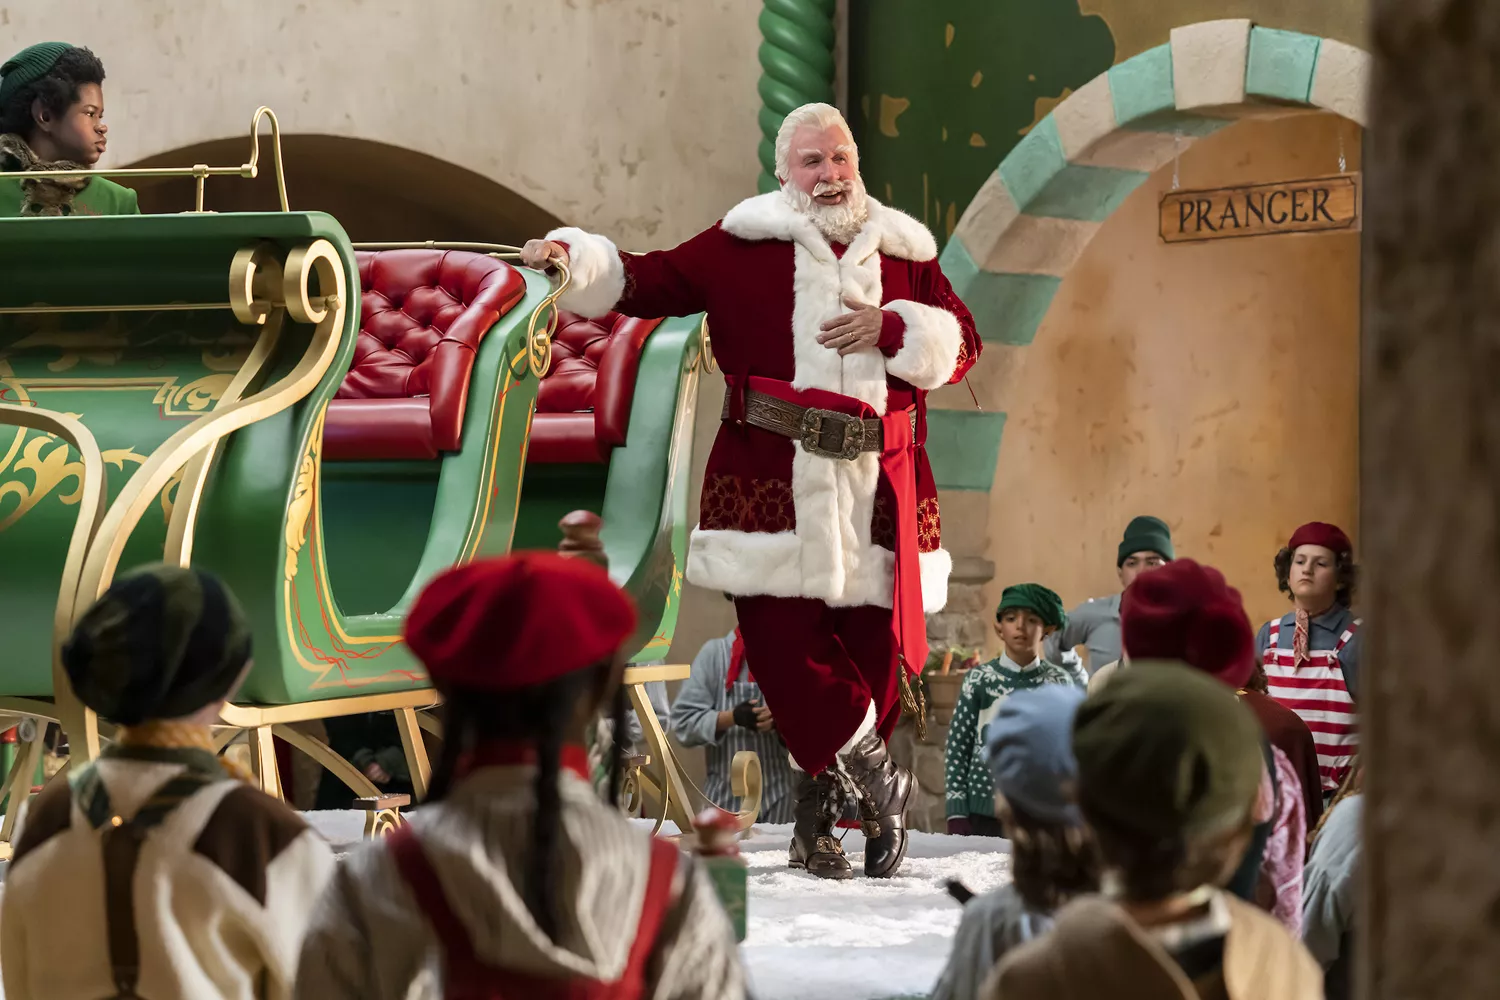 New Trailer and Poster For ‘The Santa Clauses’ Debuts